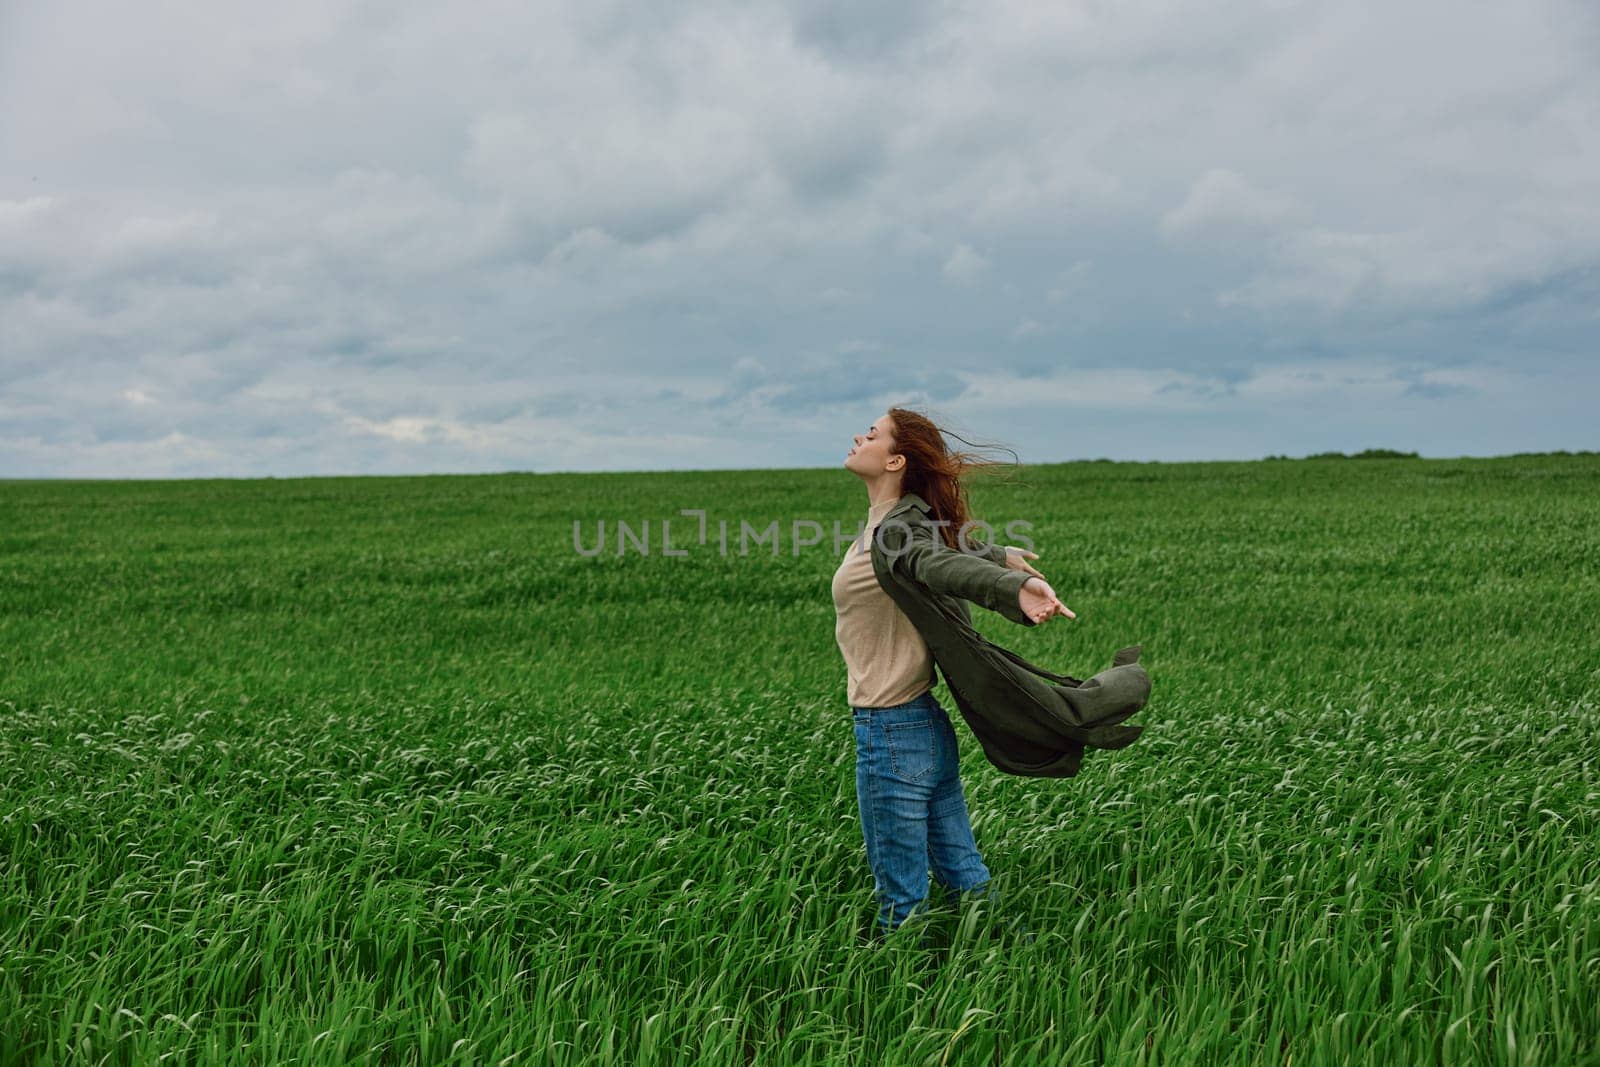 a woman in a long coat stands in tall green grass in a field, in cloudy weather, enjoying nature and the view by Vichizh